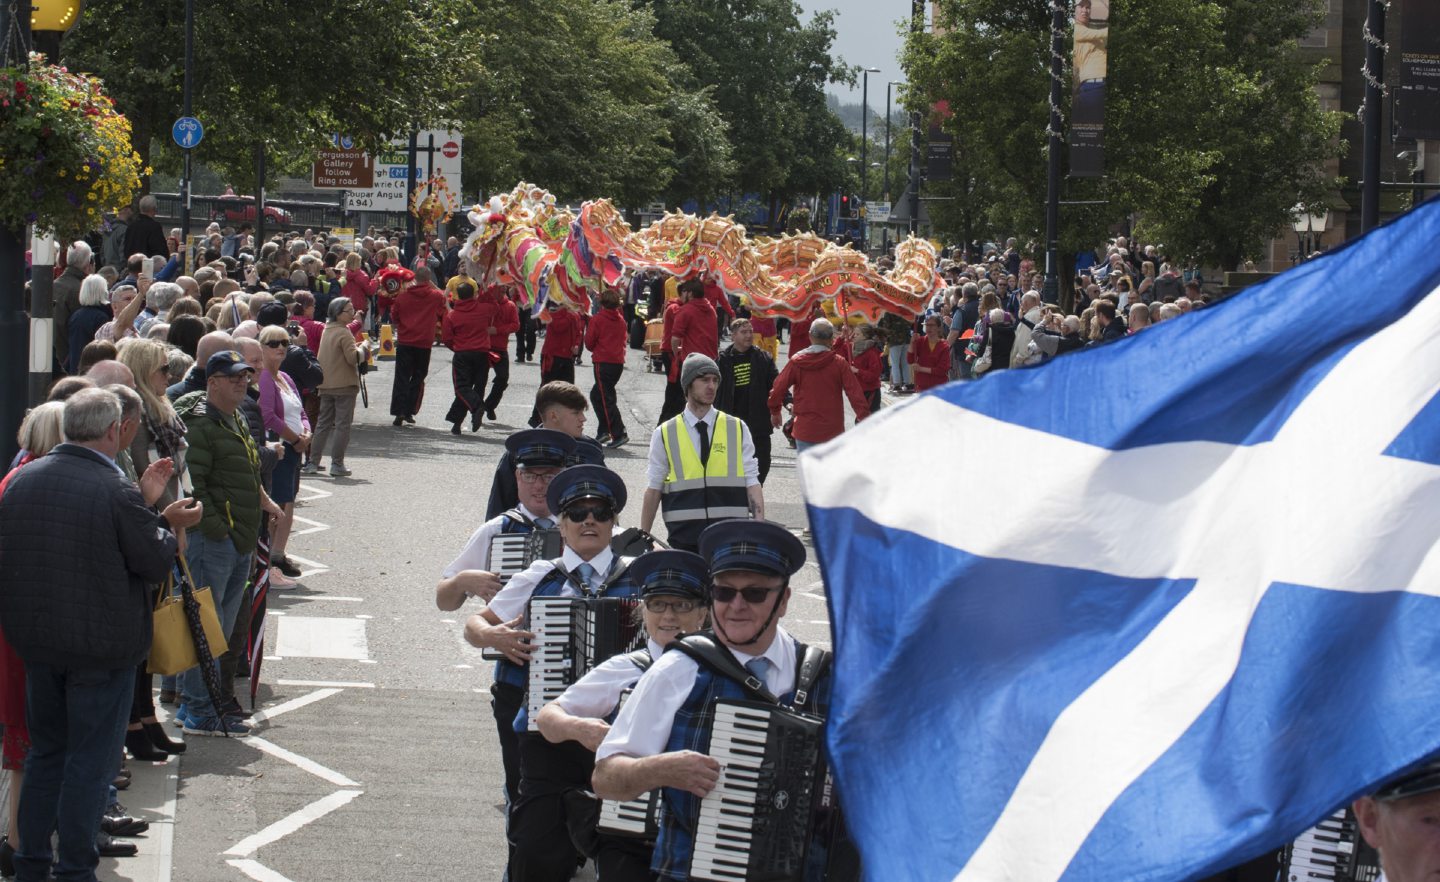 The parade through Perth in 2019.